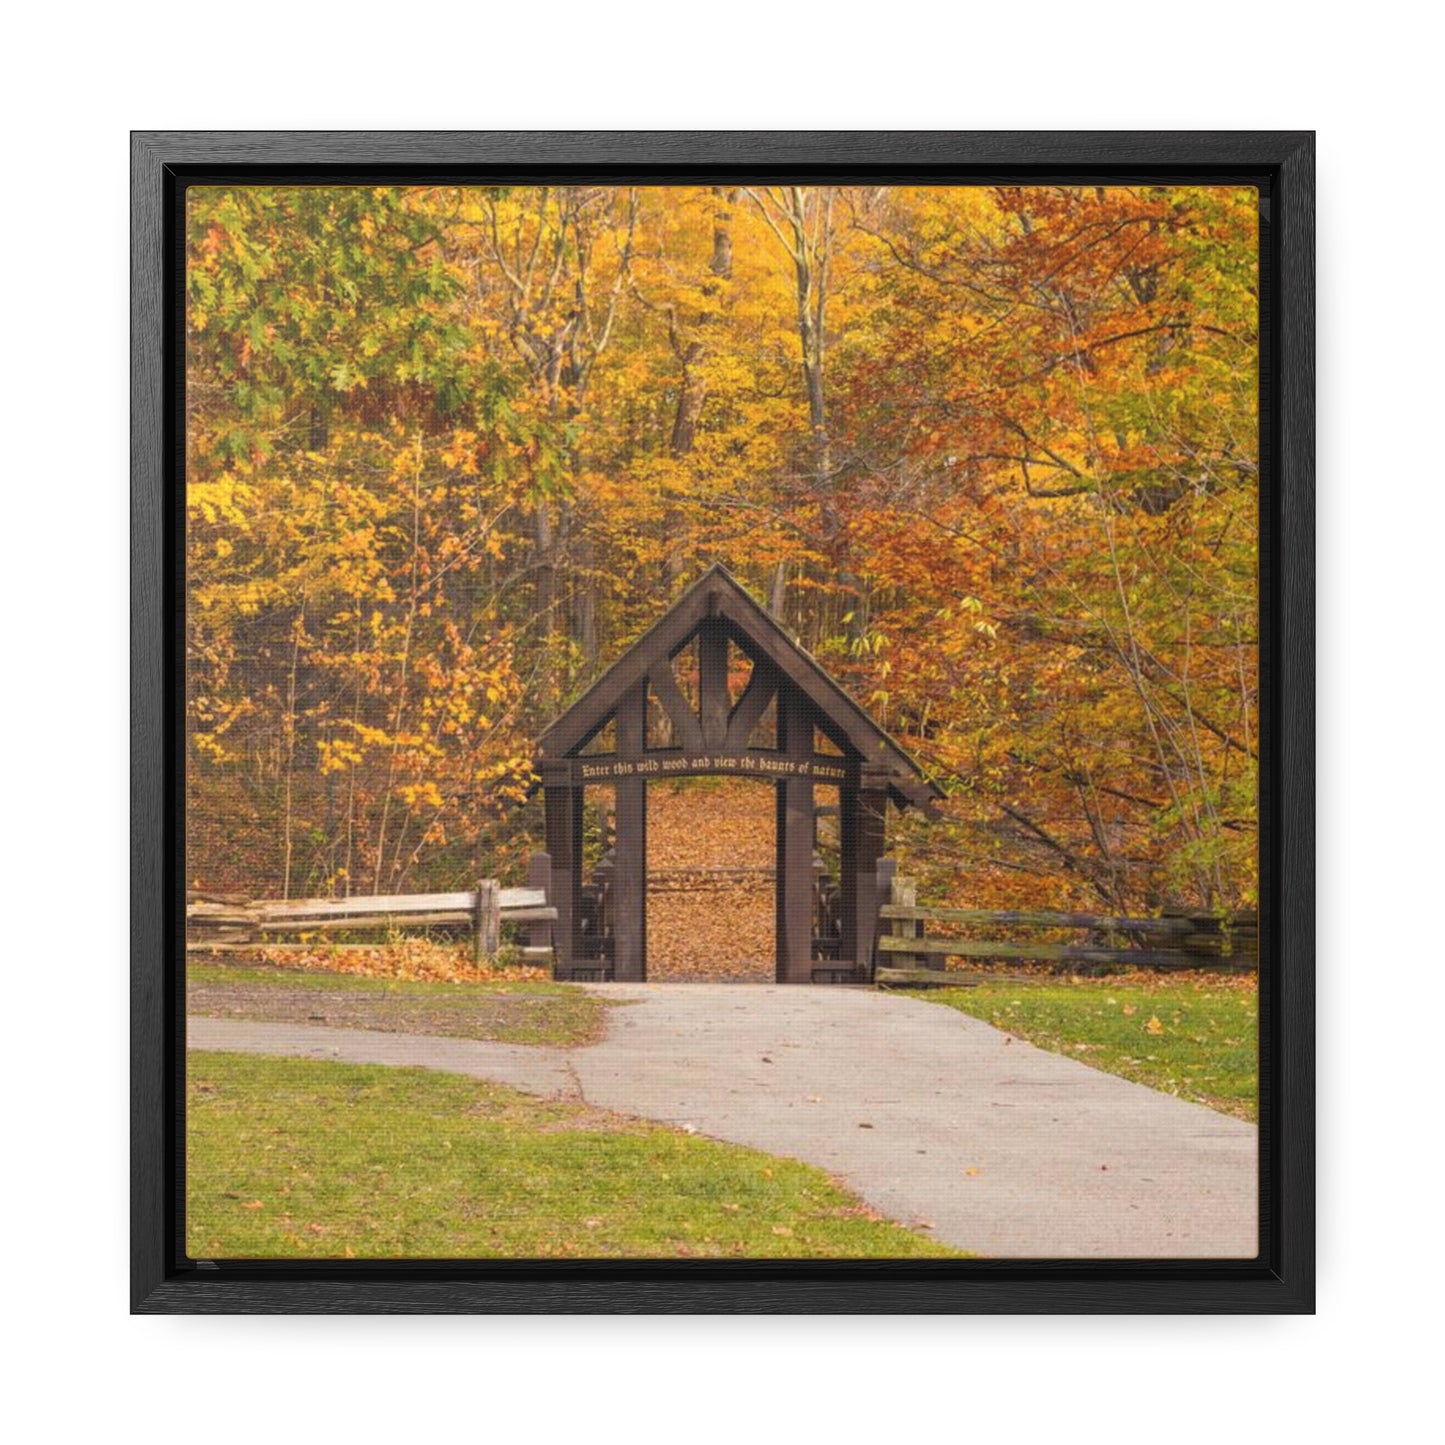 Seven Bridges Trail’s Covered Bridge at Grant Park in South Milwaukee Wisconsin, Photography Square Framed Canvas Wrap Wall Art